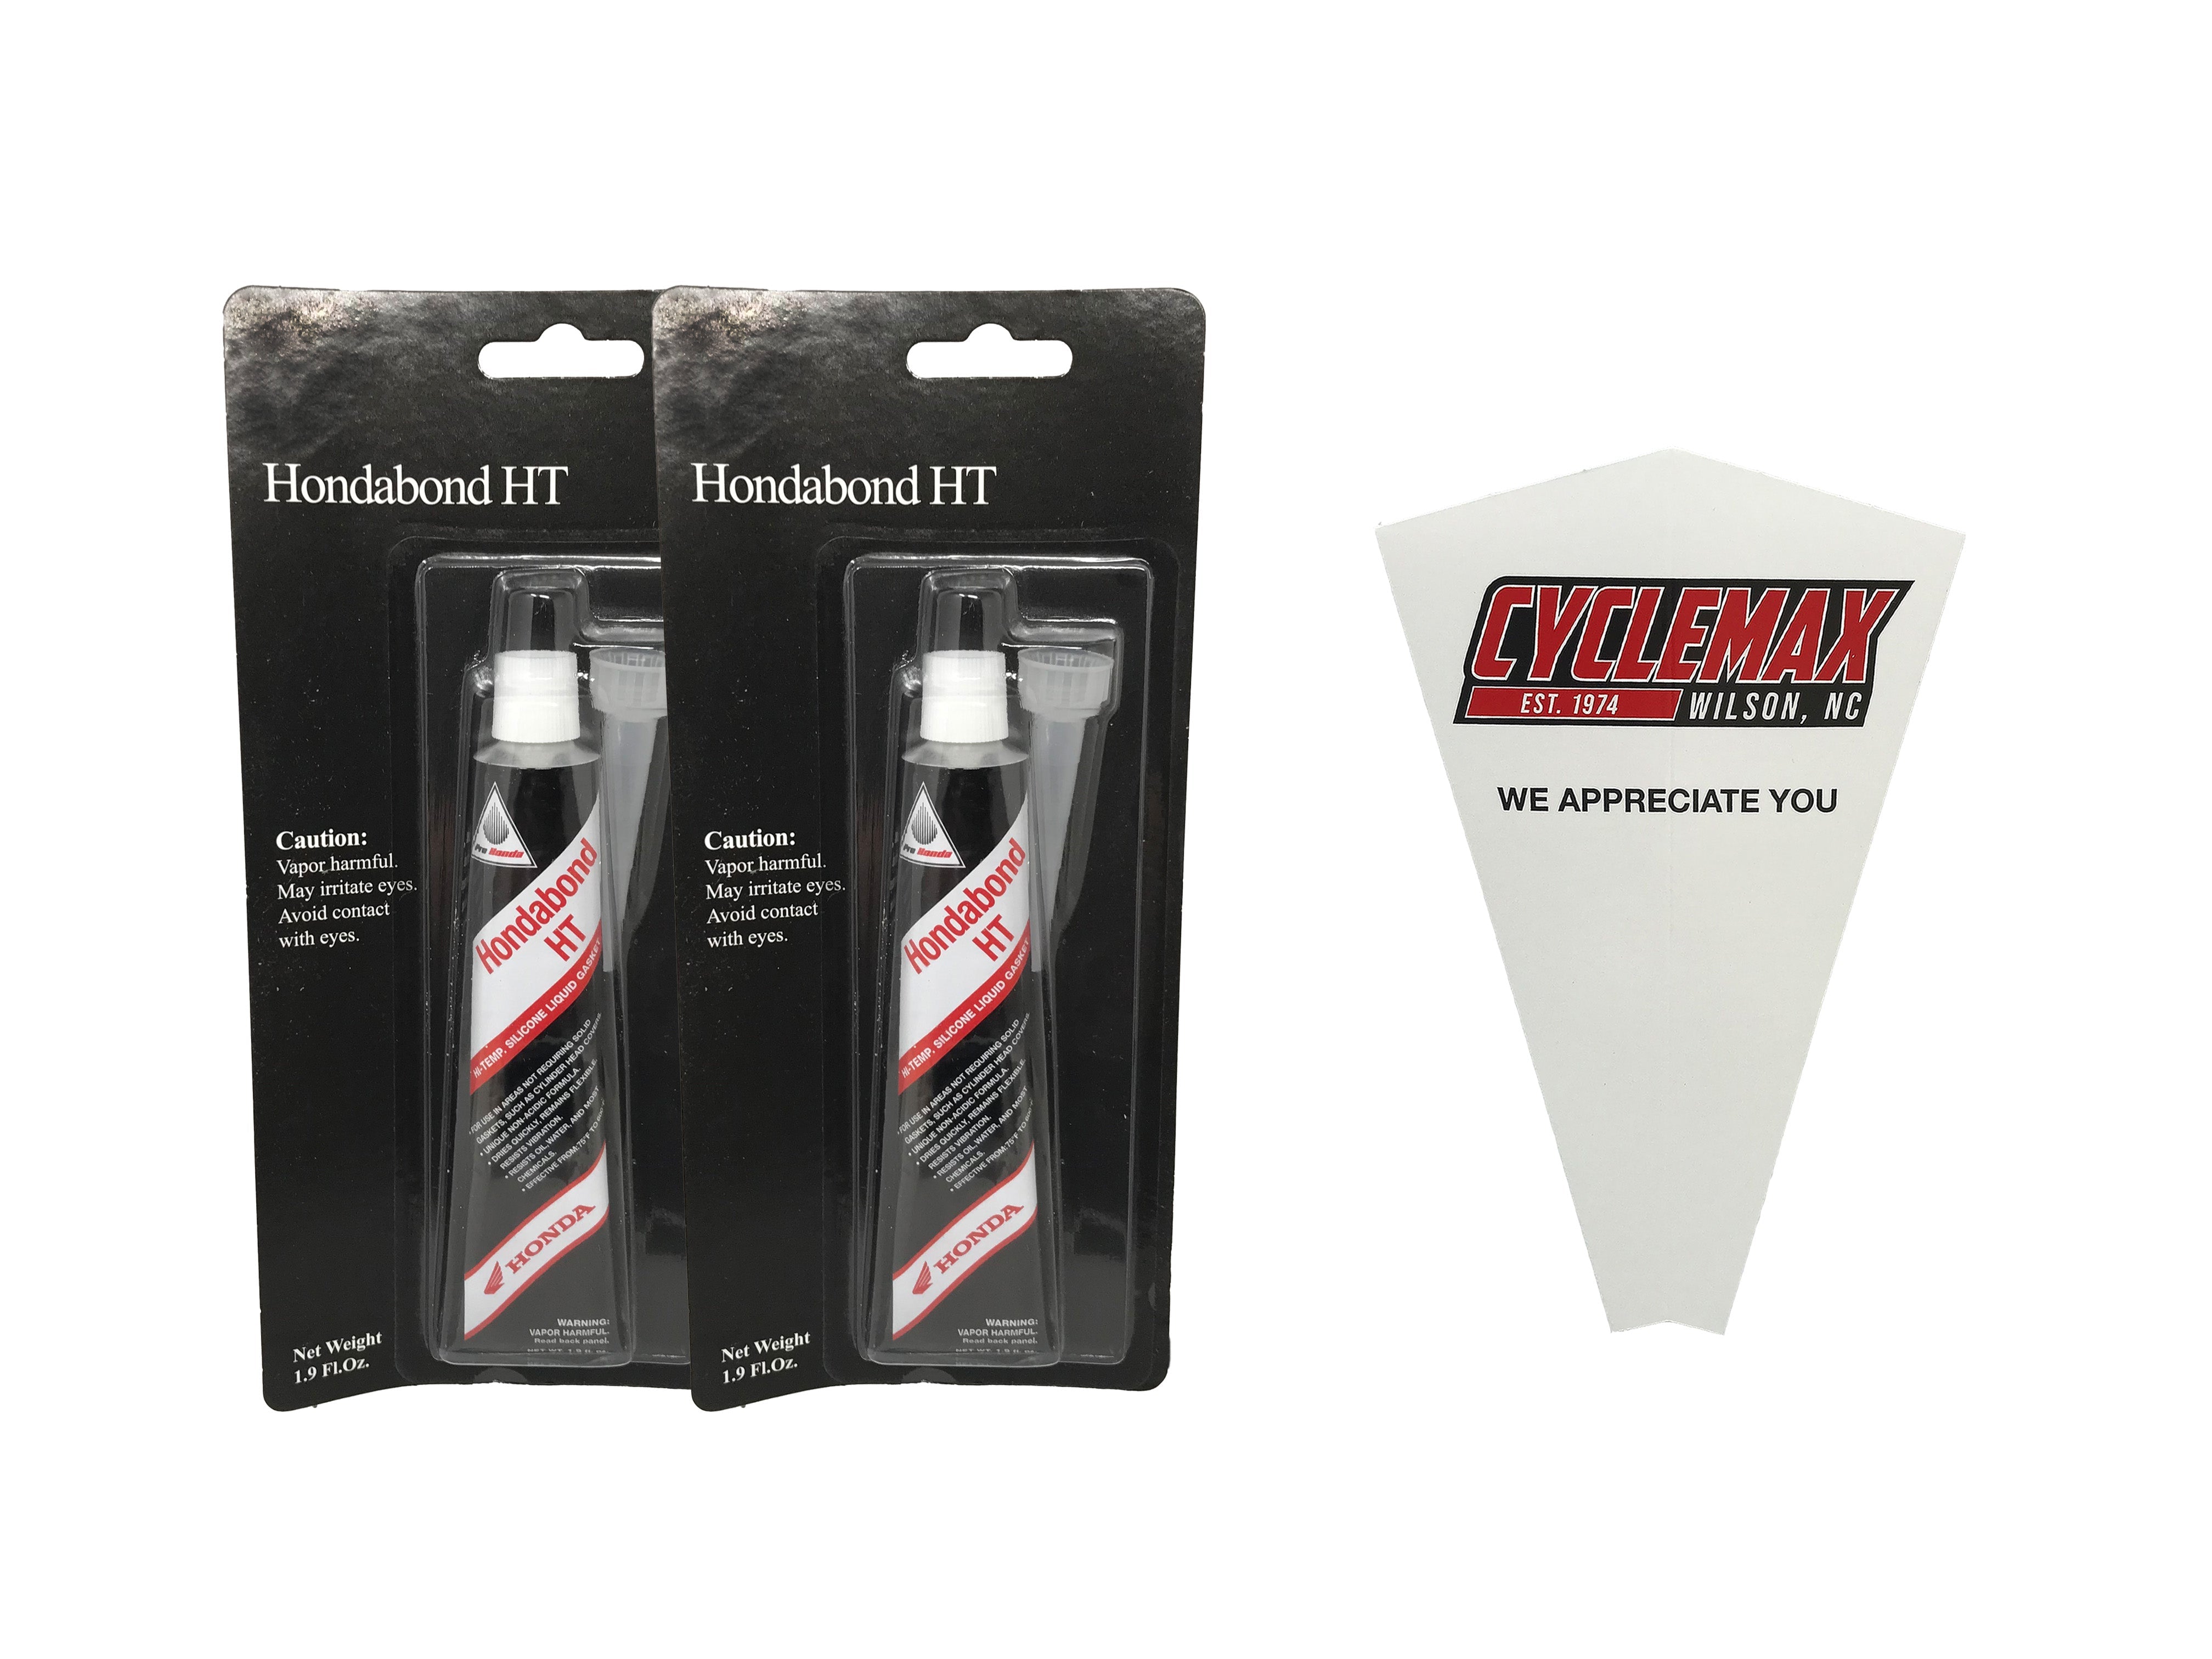 Cyclemax Two Pack for Honda Hondabond HT Silicone Liquid Gasket 08718-0004 Contains Two 3oz Tubes and a Funnel